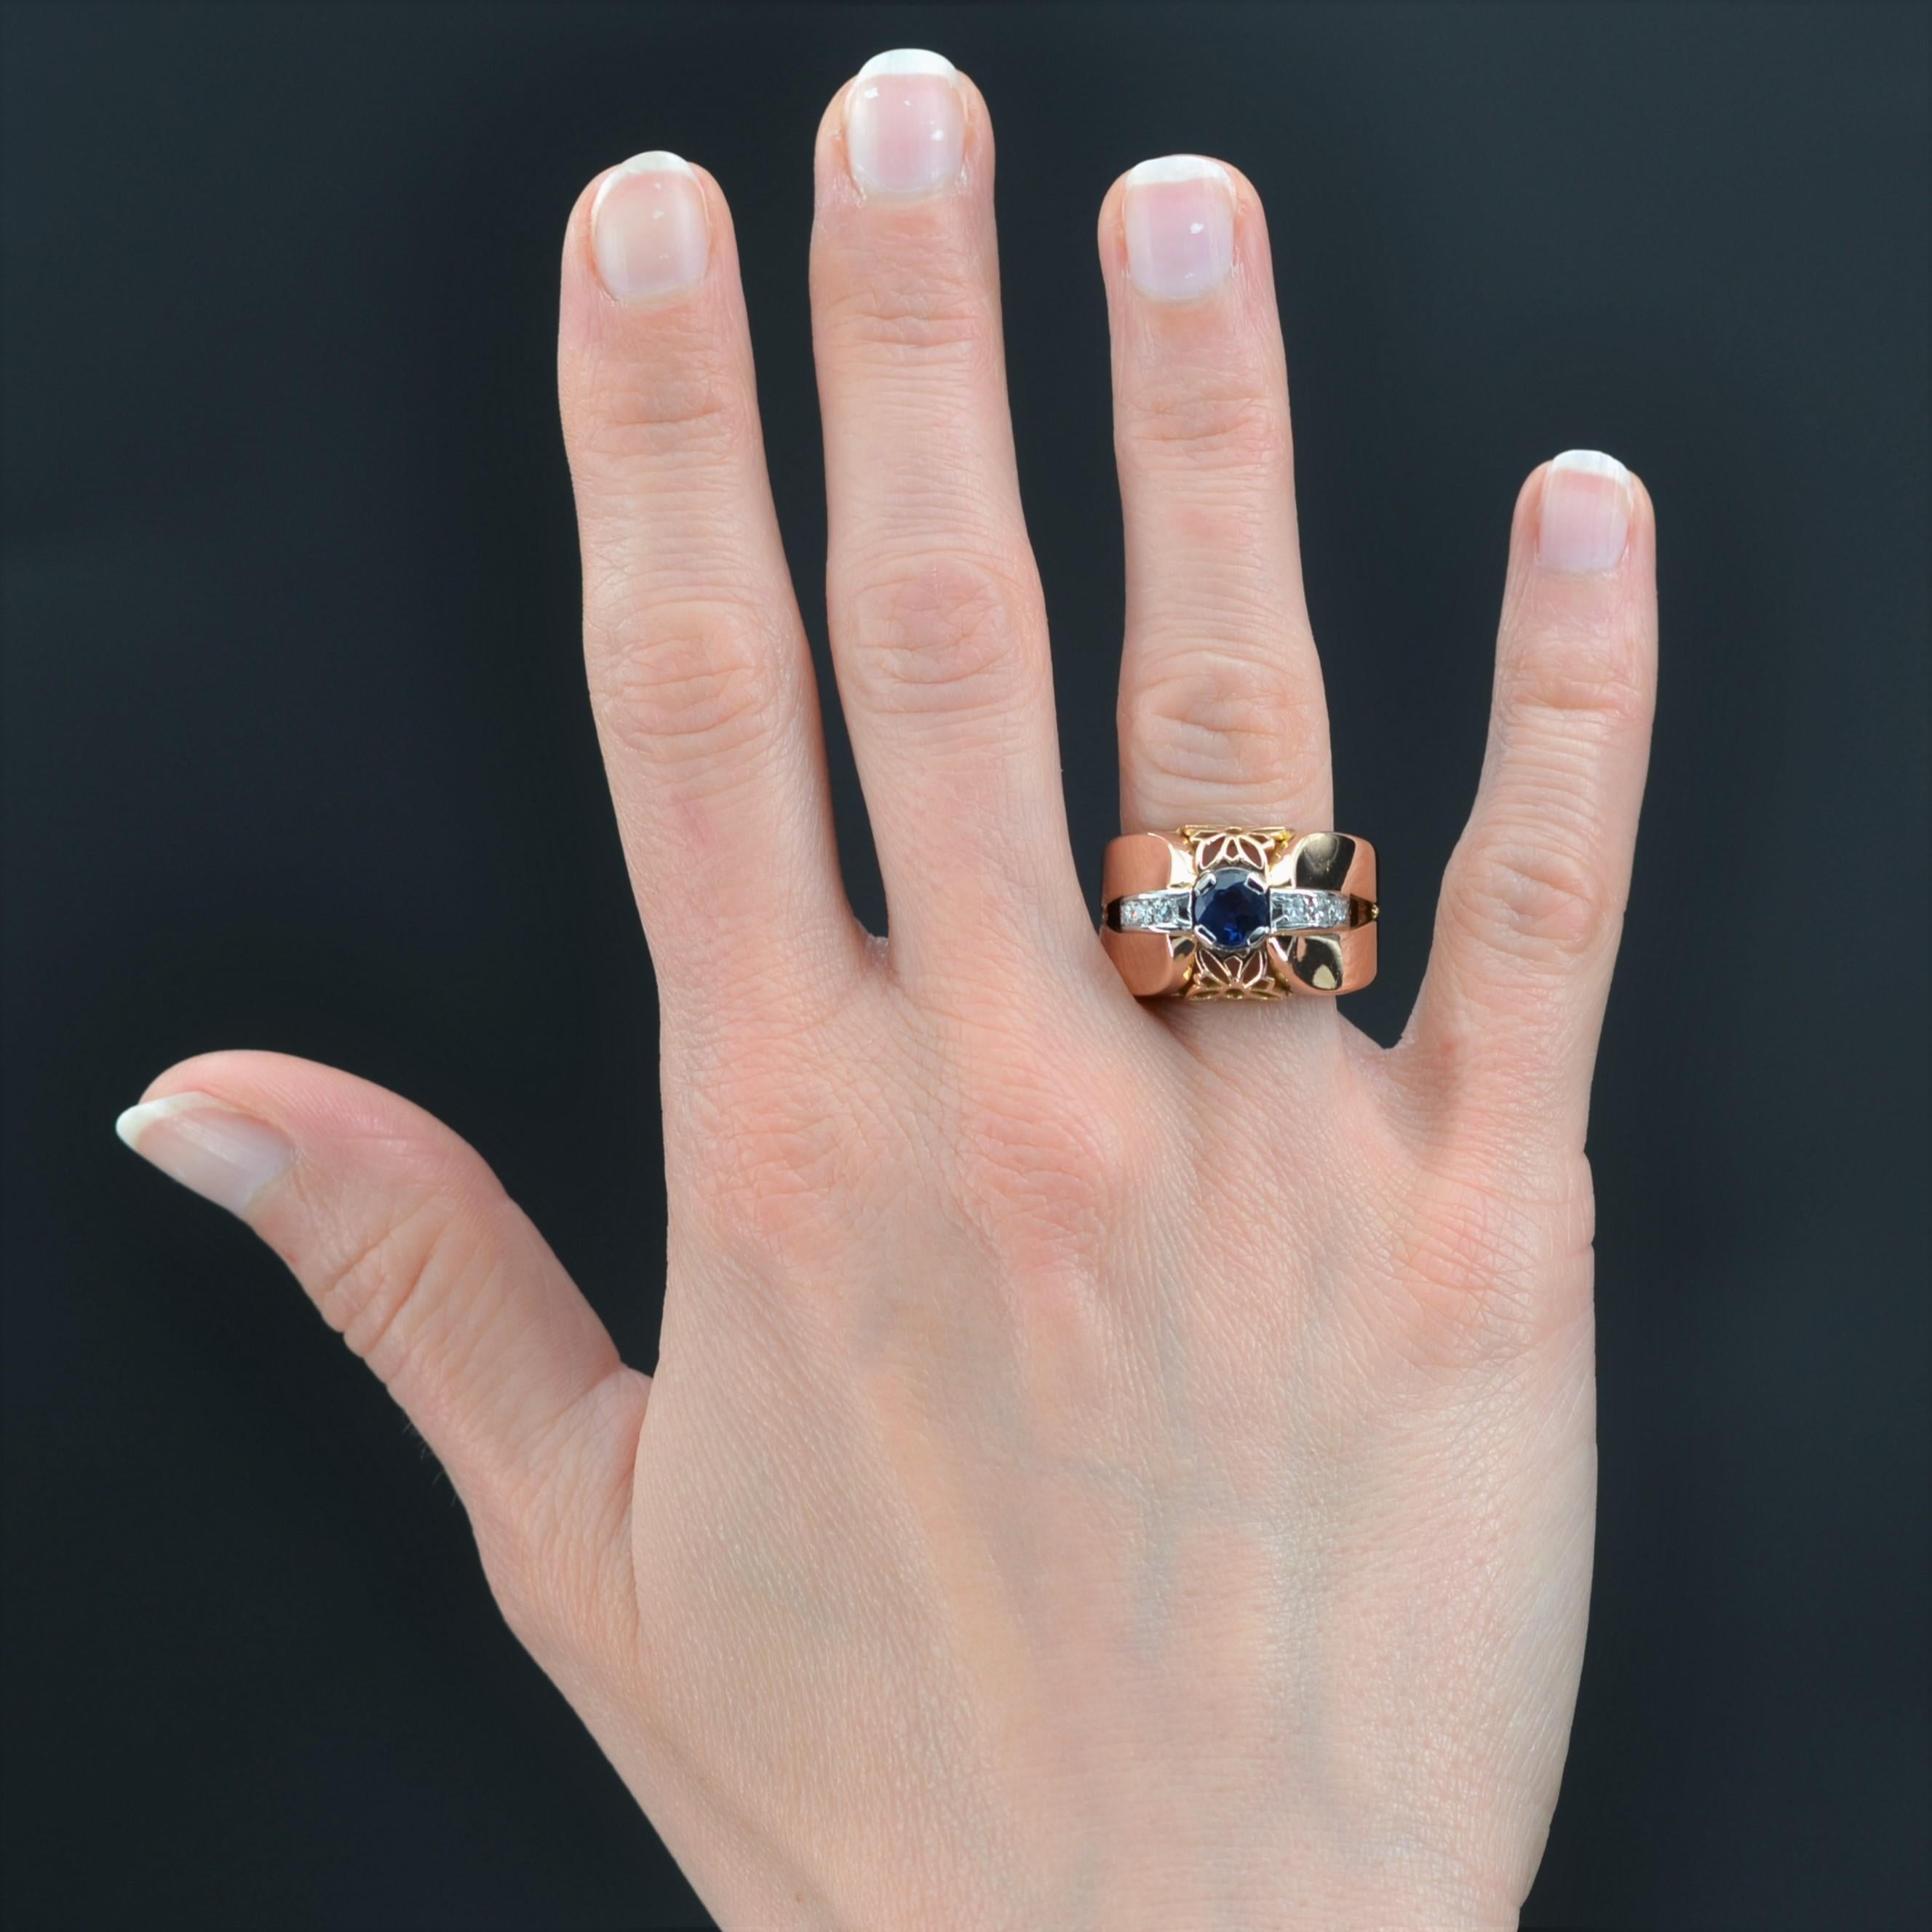 Ring in 18 karat yellow gold, eagle head hallmark and platinum, dog head hallmark.
Of a magnificent volume this tank ring is decorated on its top with a round sapphire supported on both sides by 2x3 8/8- cut diamonds. An openwork decoration of